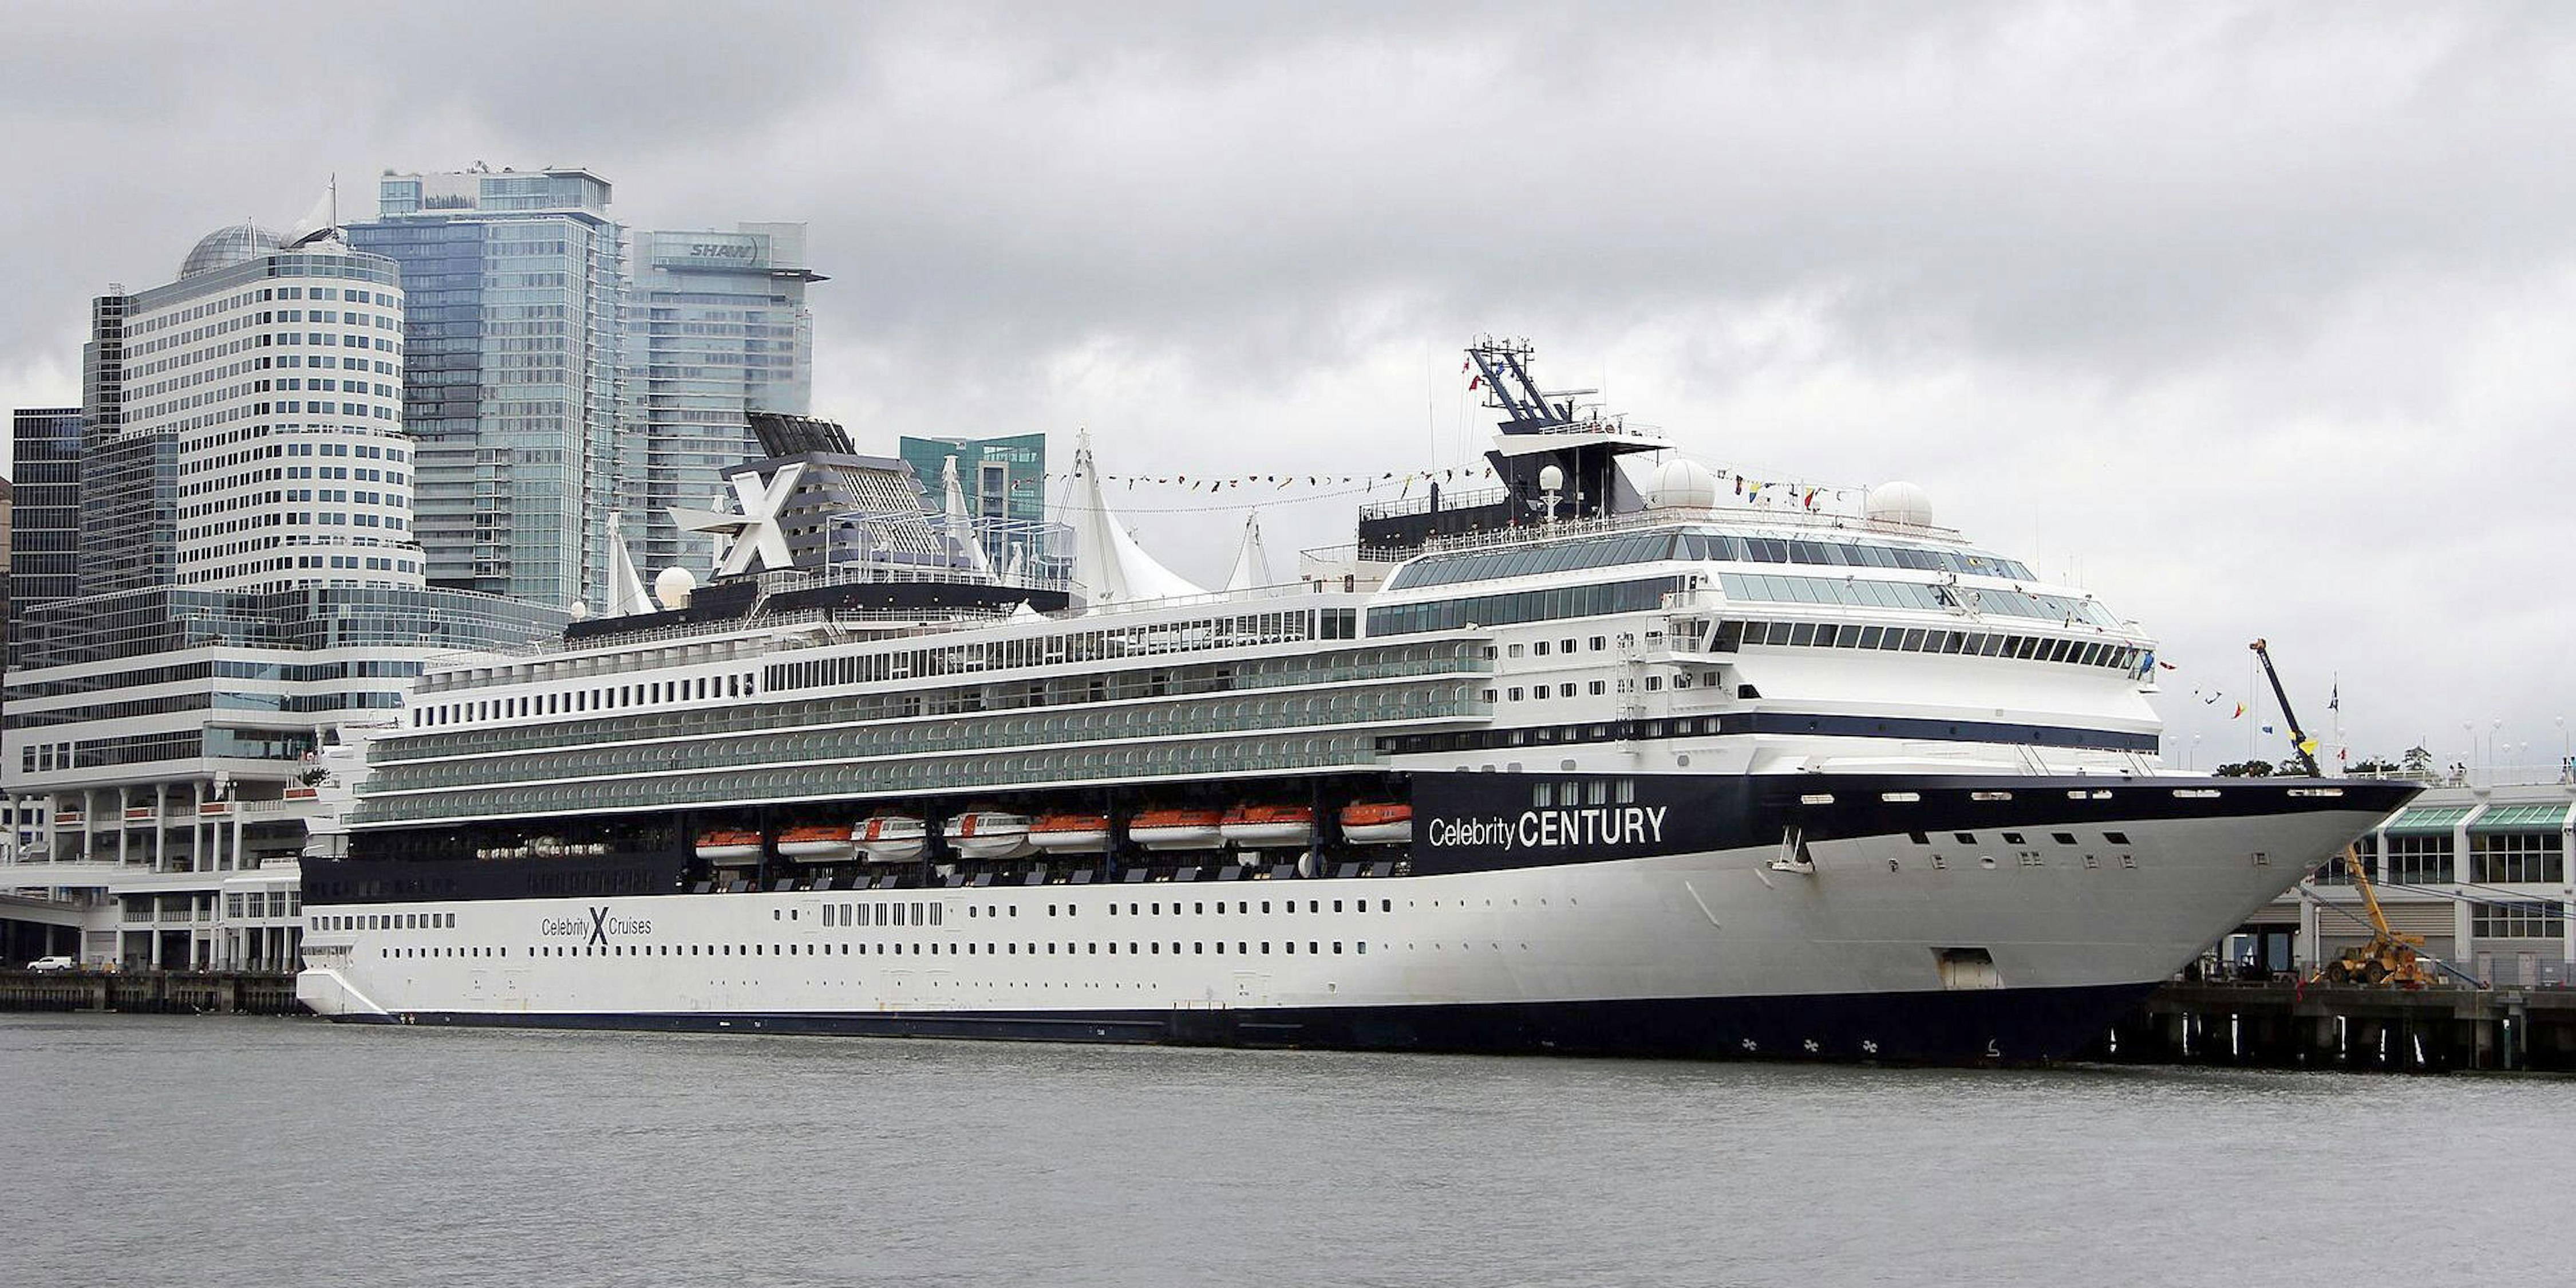 celebrity cruises compared to royal caribbean